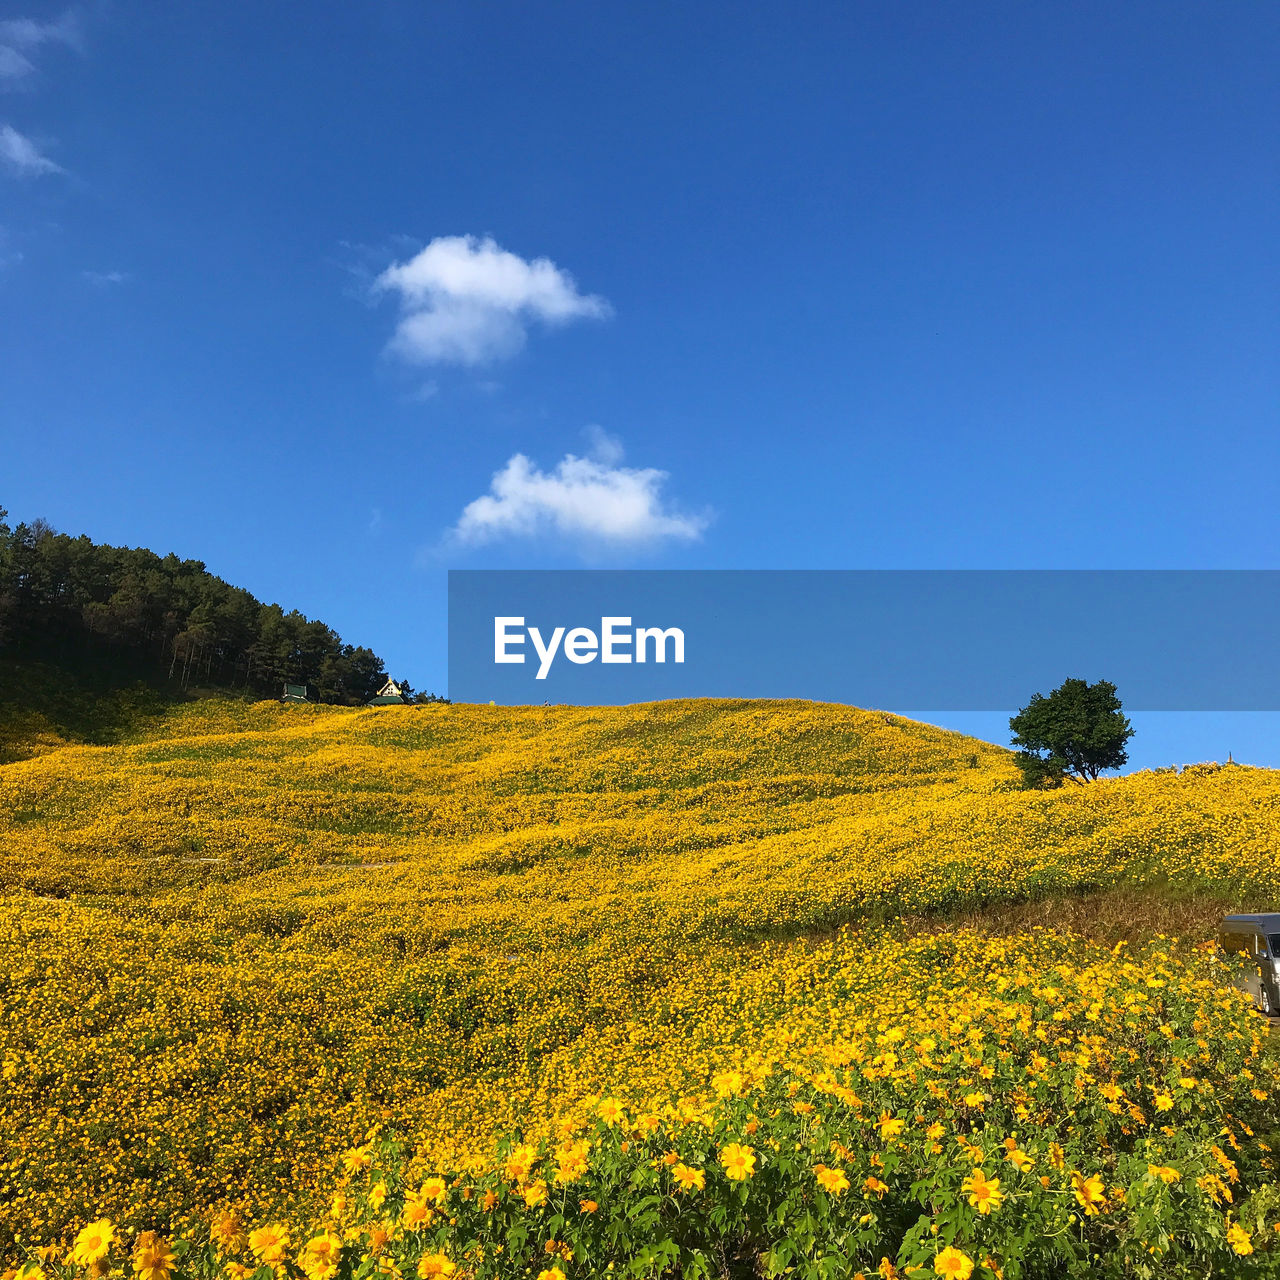 SCENIC VIEW OF FRESH YELLOW FLOWERS AGAINST SKY